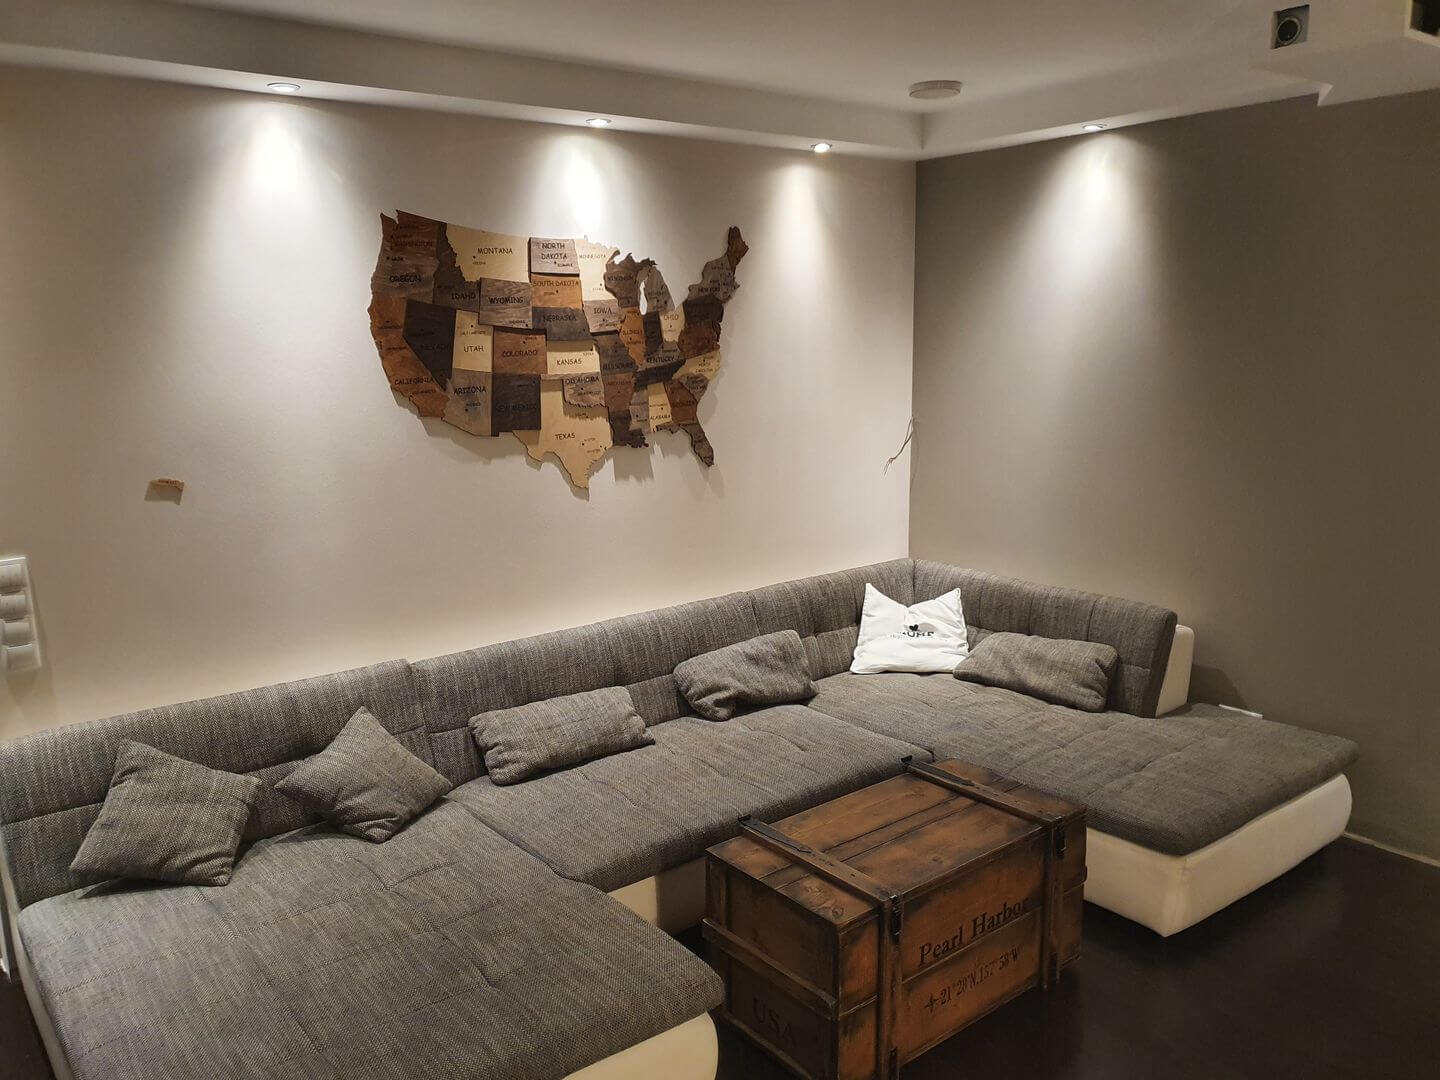 3D Wooden Map of the US in a Living Room